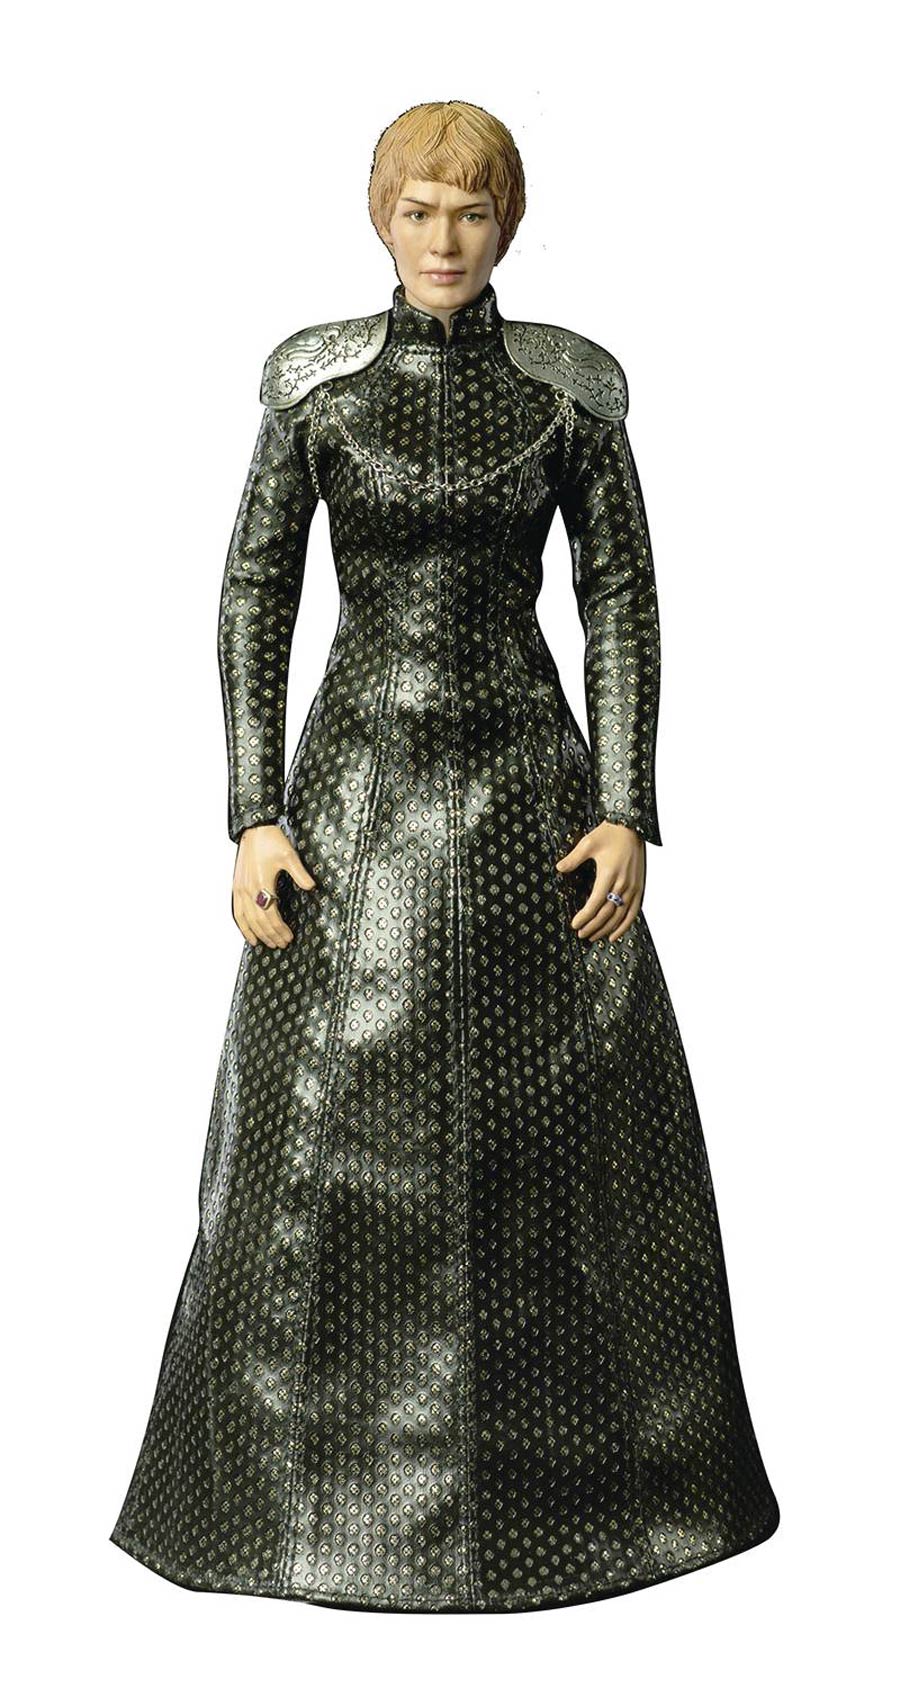 Game Of Thrones Cersei Lannister 1/6 Scale Figure